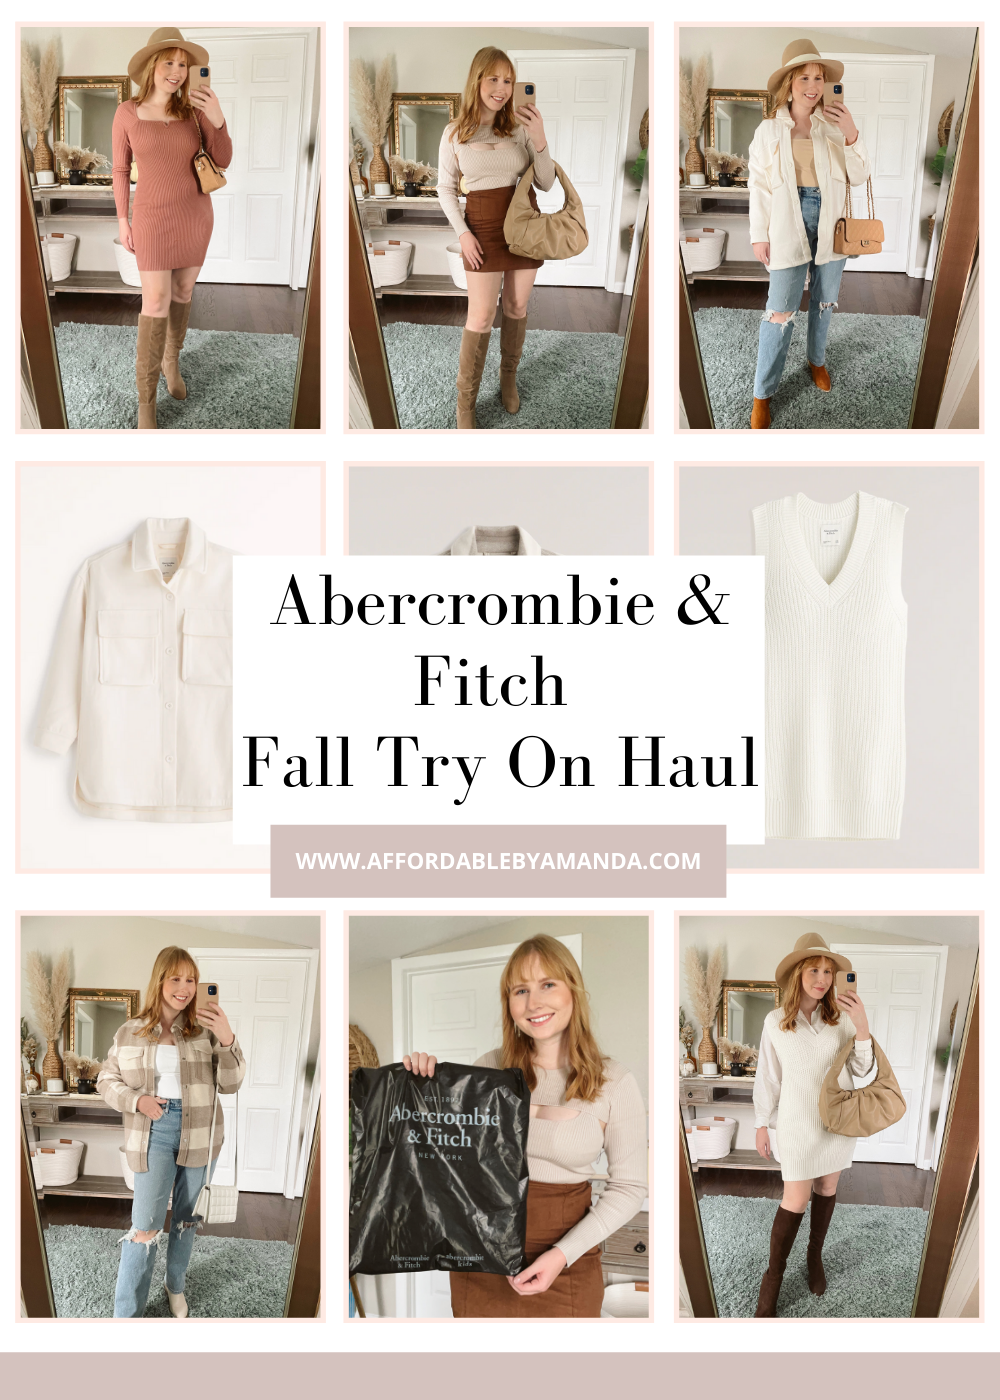 Abercrombie Fall Preview 2021 | Abercrombie New Arrivals | Abercrombie and Fitch Try On Haul Fall 2021 | Affordable by Amanda